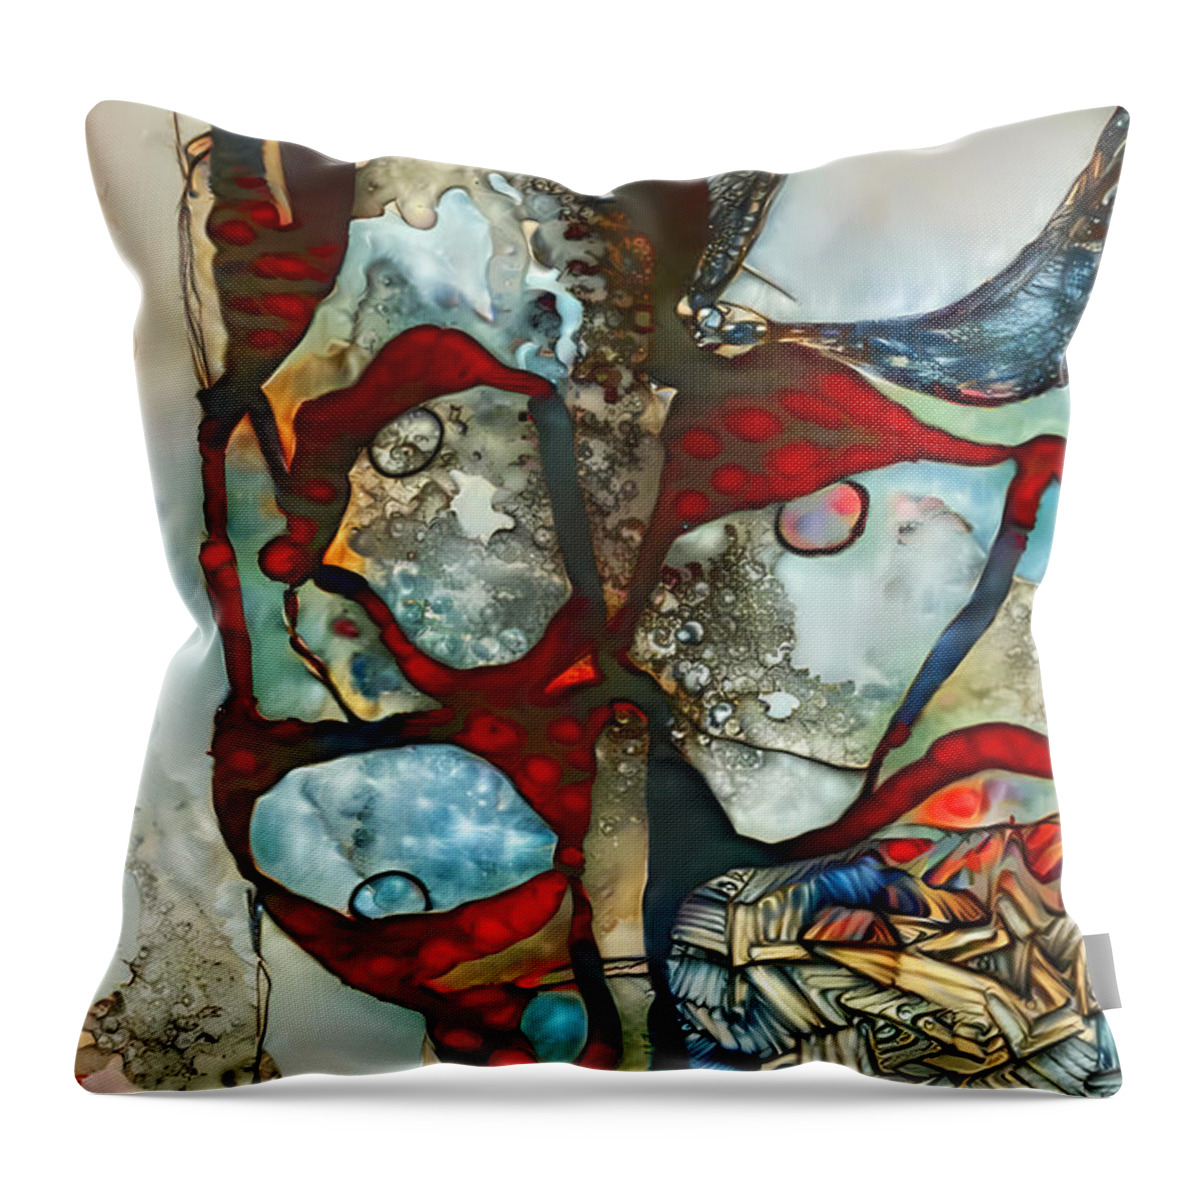 Contemporary Art Throw Pillow featuring the digital art 73 by Jeremiah Ray